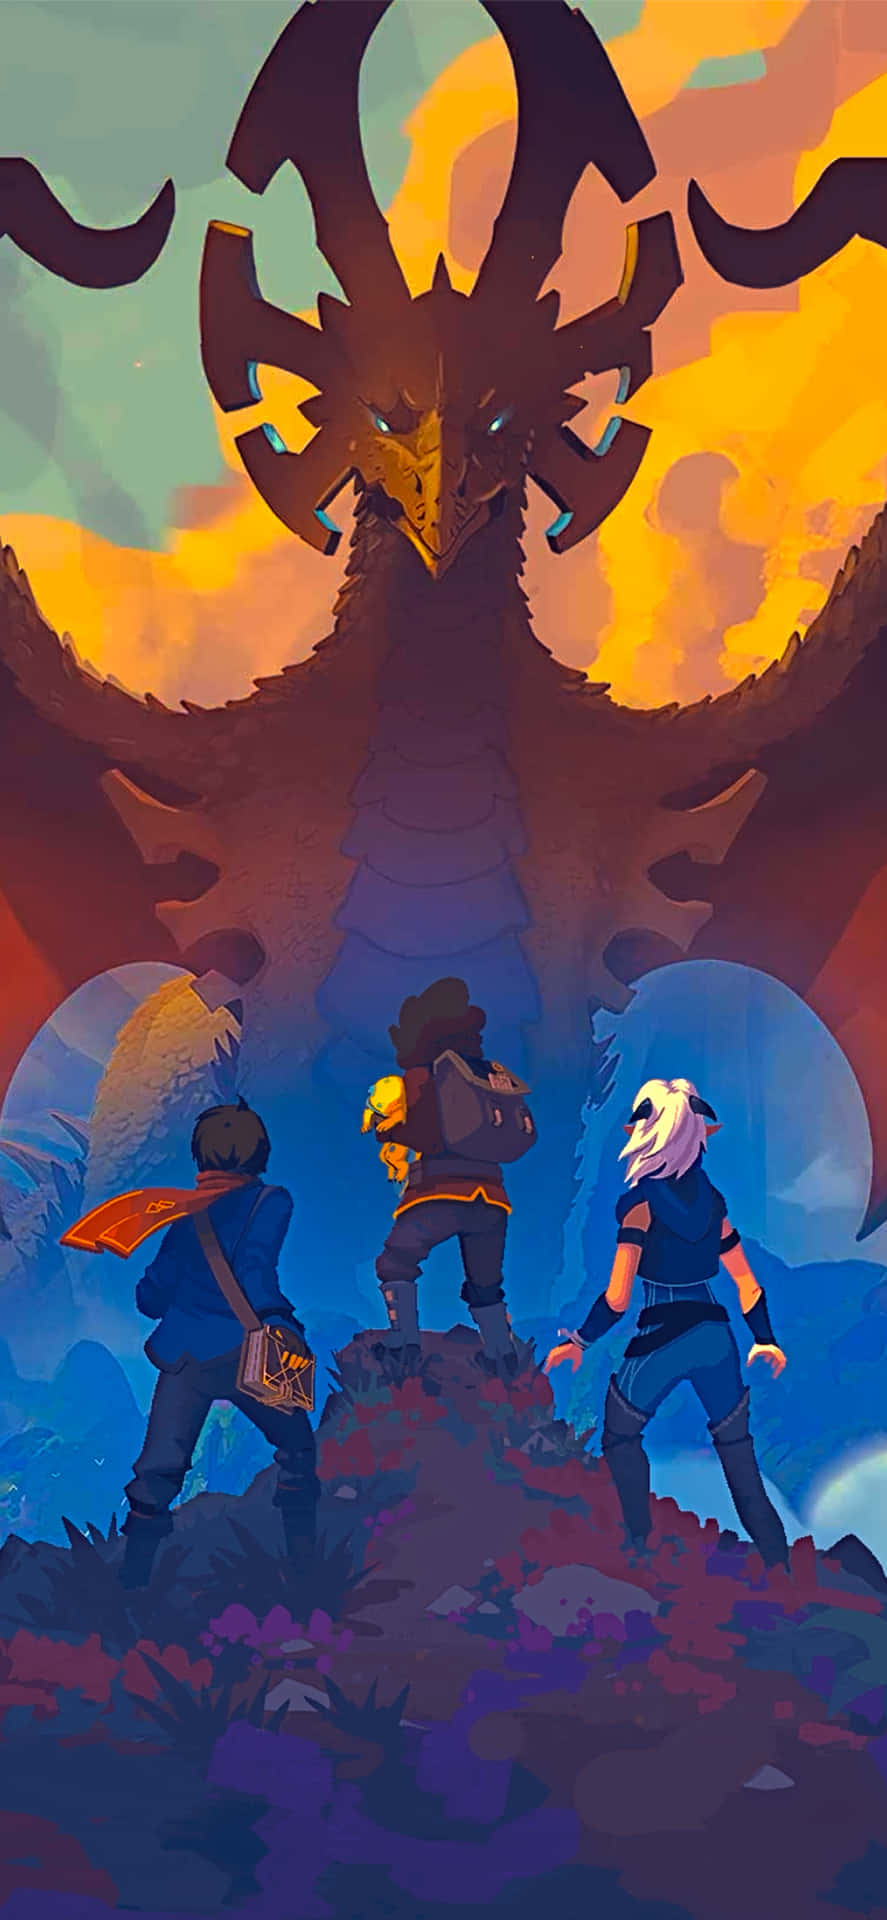 Follow the Mage and Her Chances of Finding the Dragon Prince Wallpaper